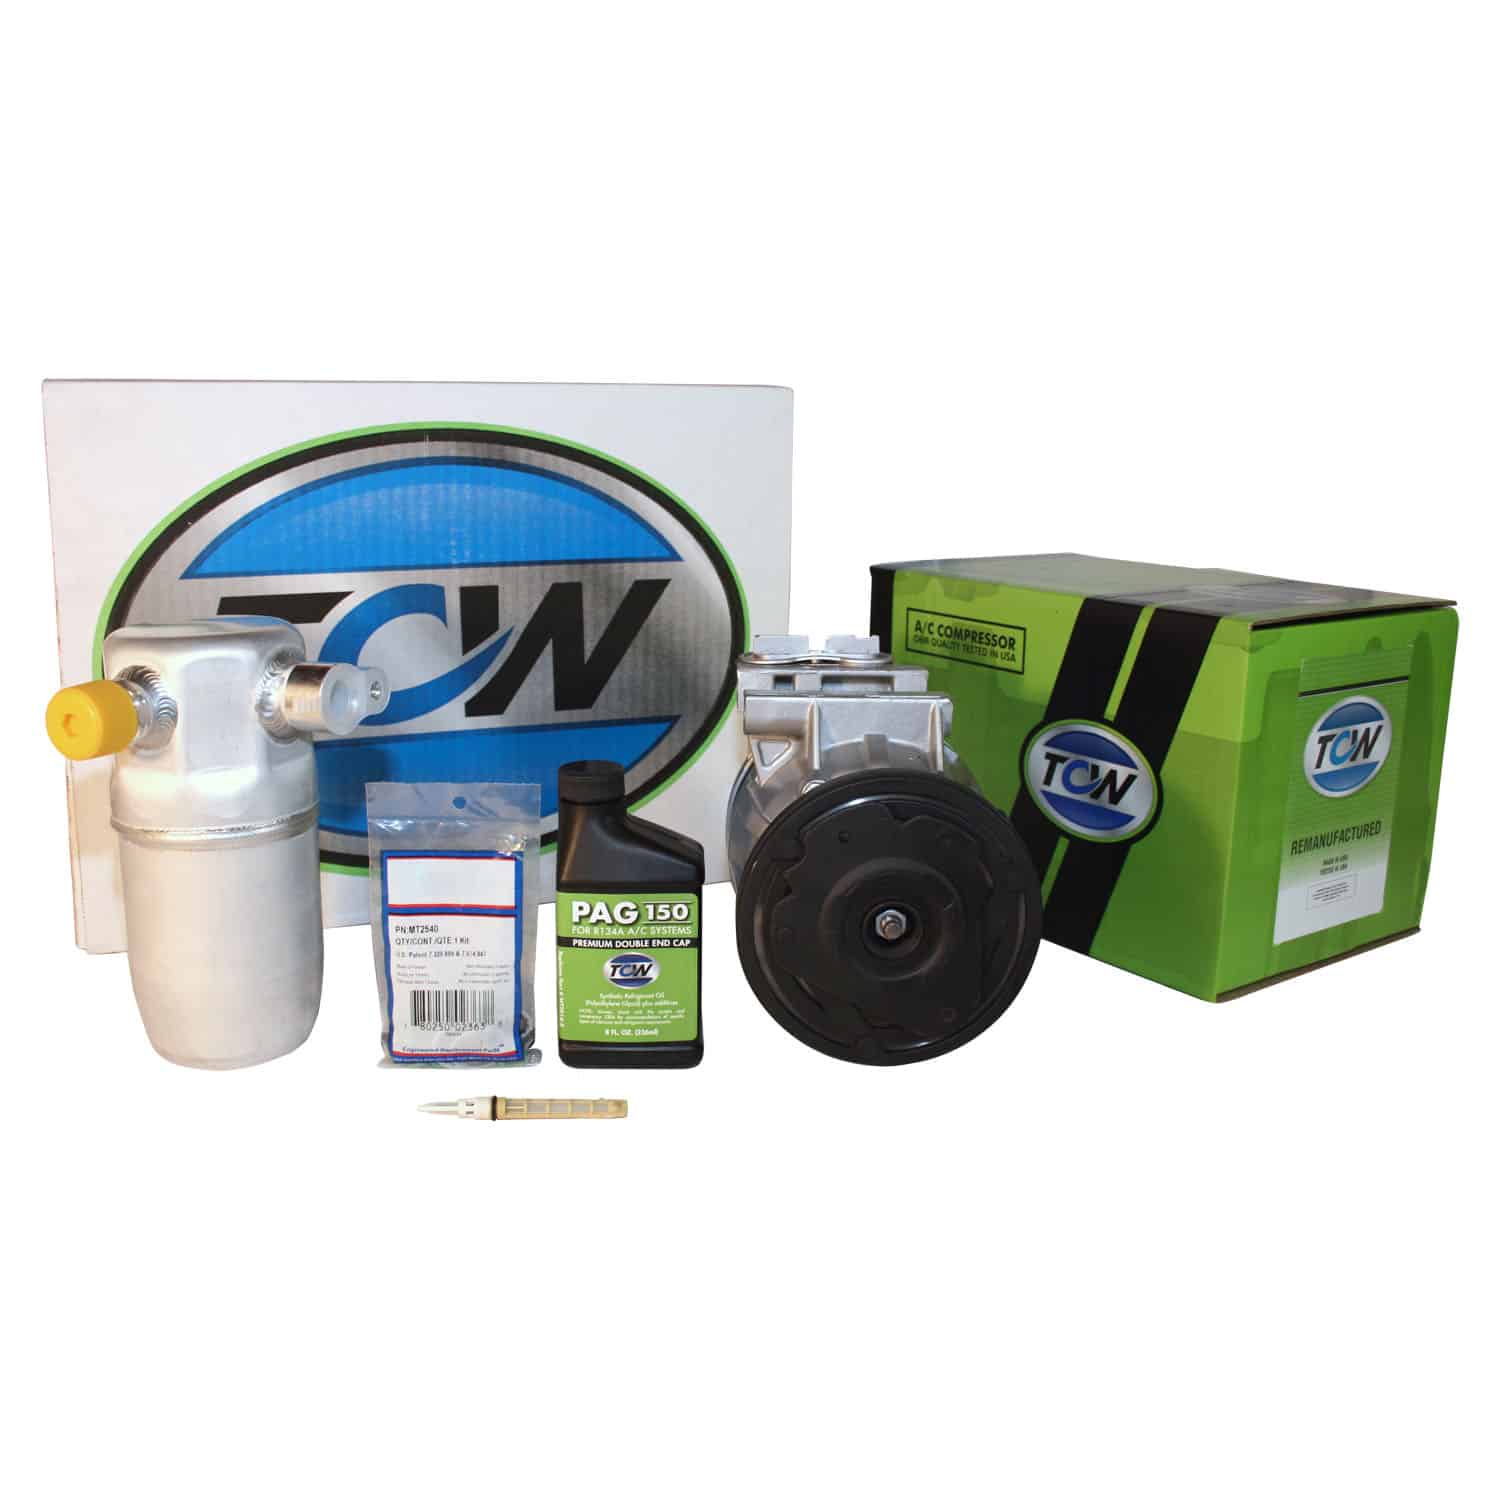 TCW Vehicle A/C Kit K1000364R Remanufactured Product Image field_60b6a13a6e67c